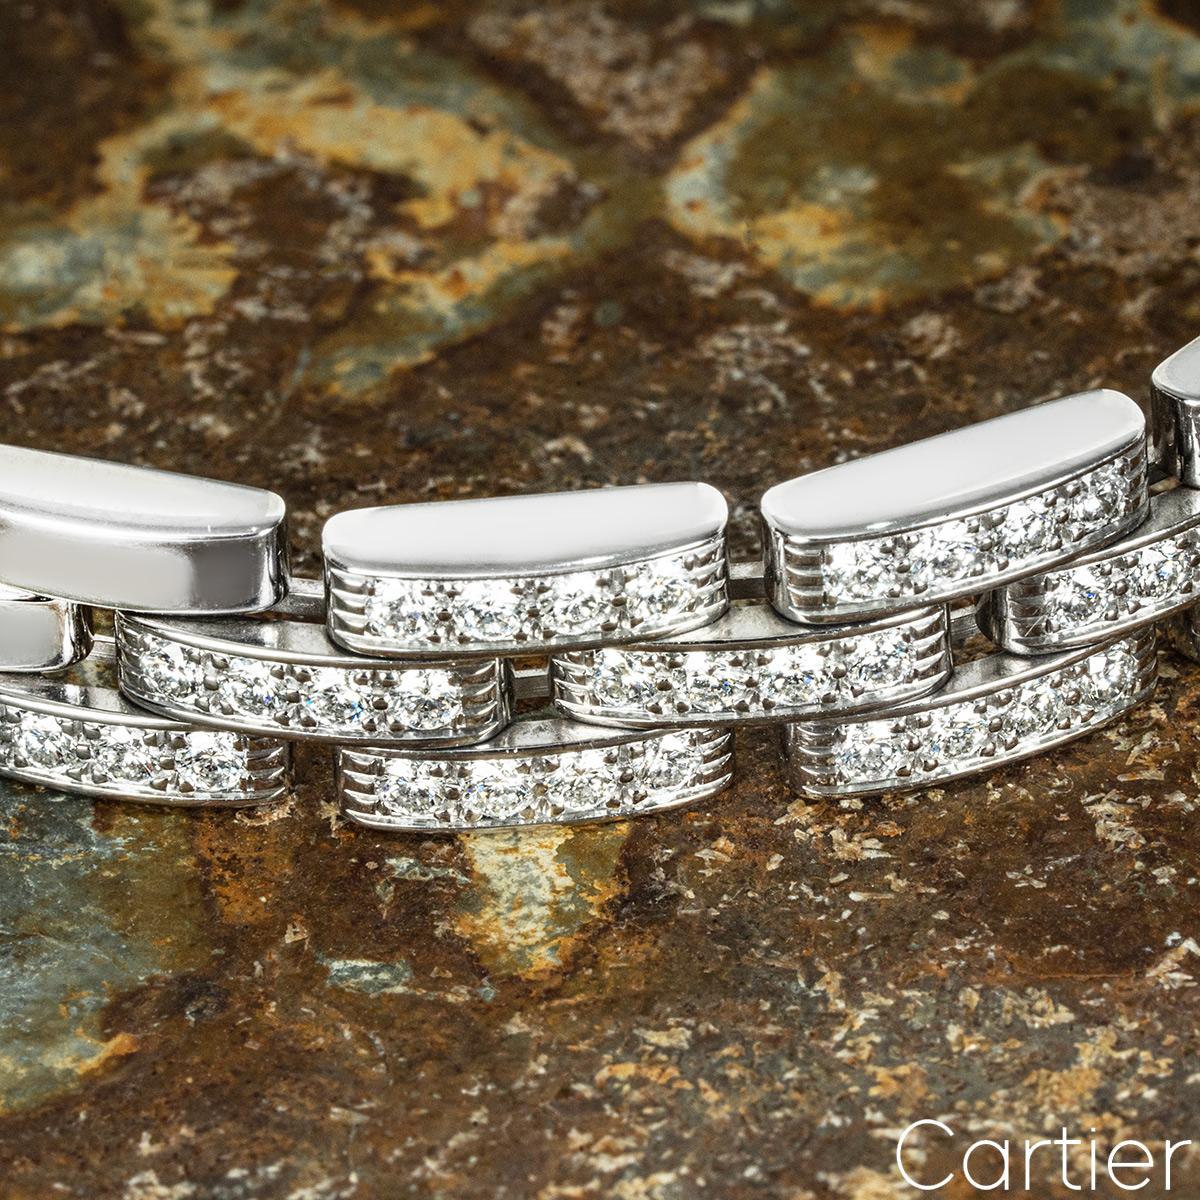 Cartier White Gold Diamond Maillon Panthere Bracelet N6025200 For Sale 1